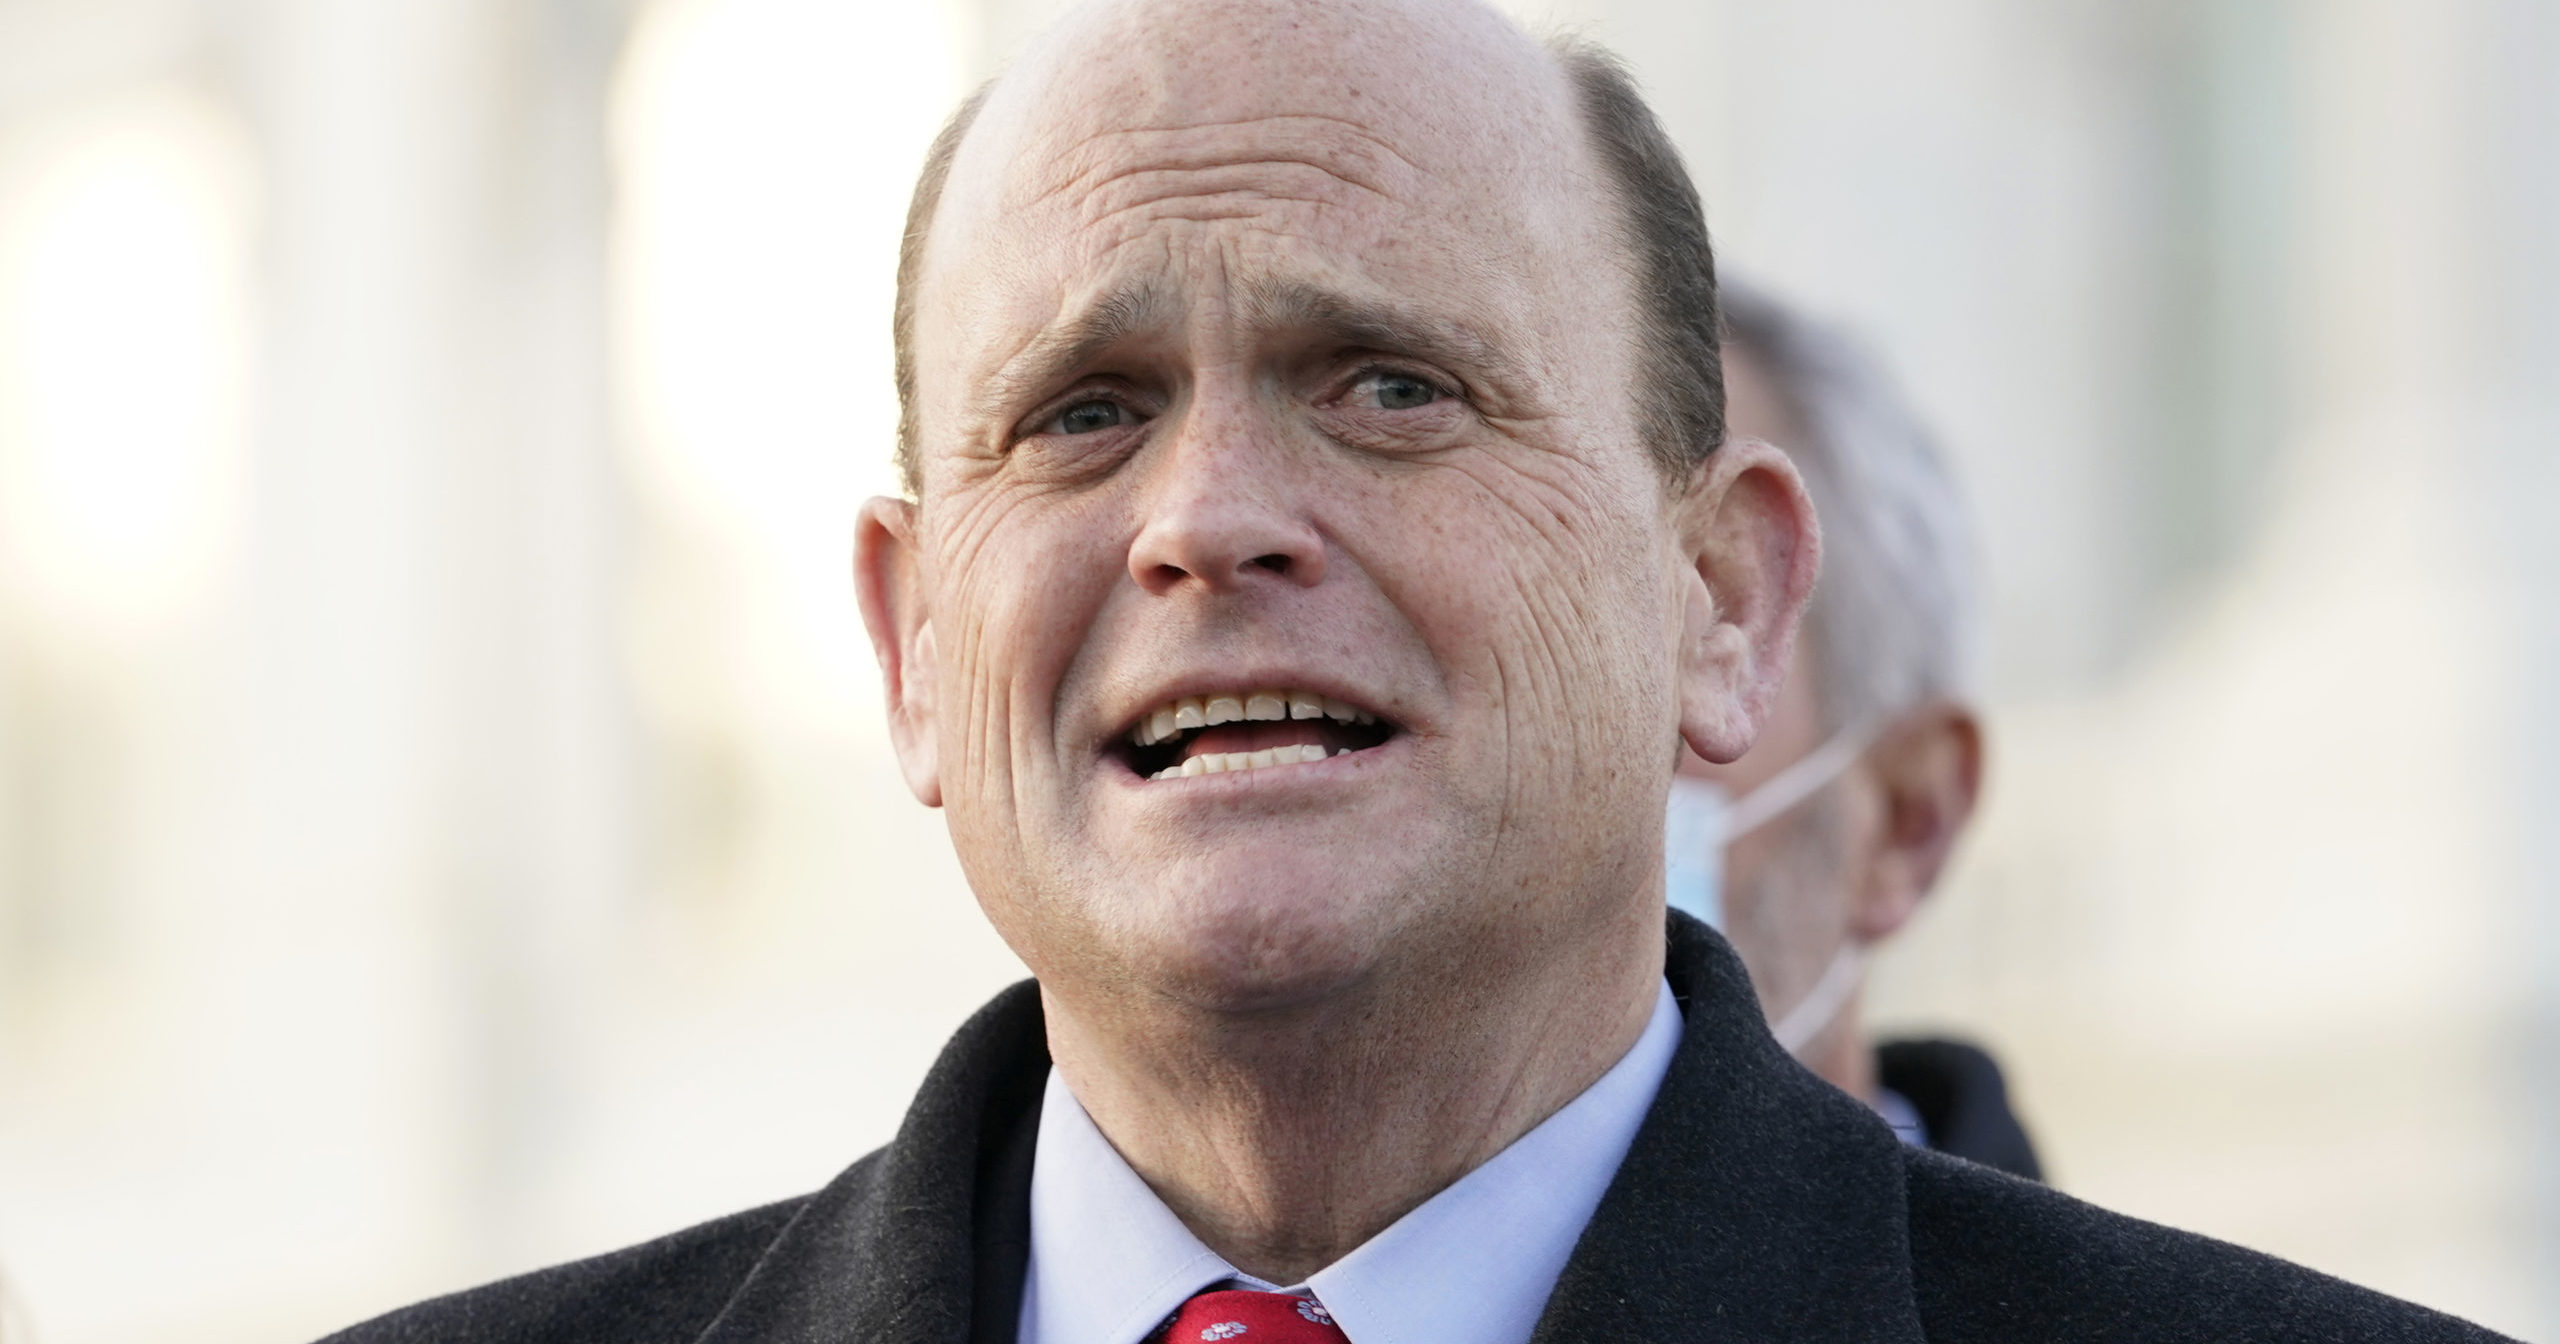 Rep. Tom Reed of New York speaks to the media on Capitol Hill in Washington on Dec. 21, 2020.